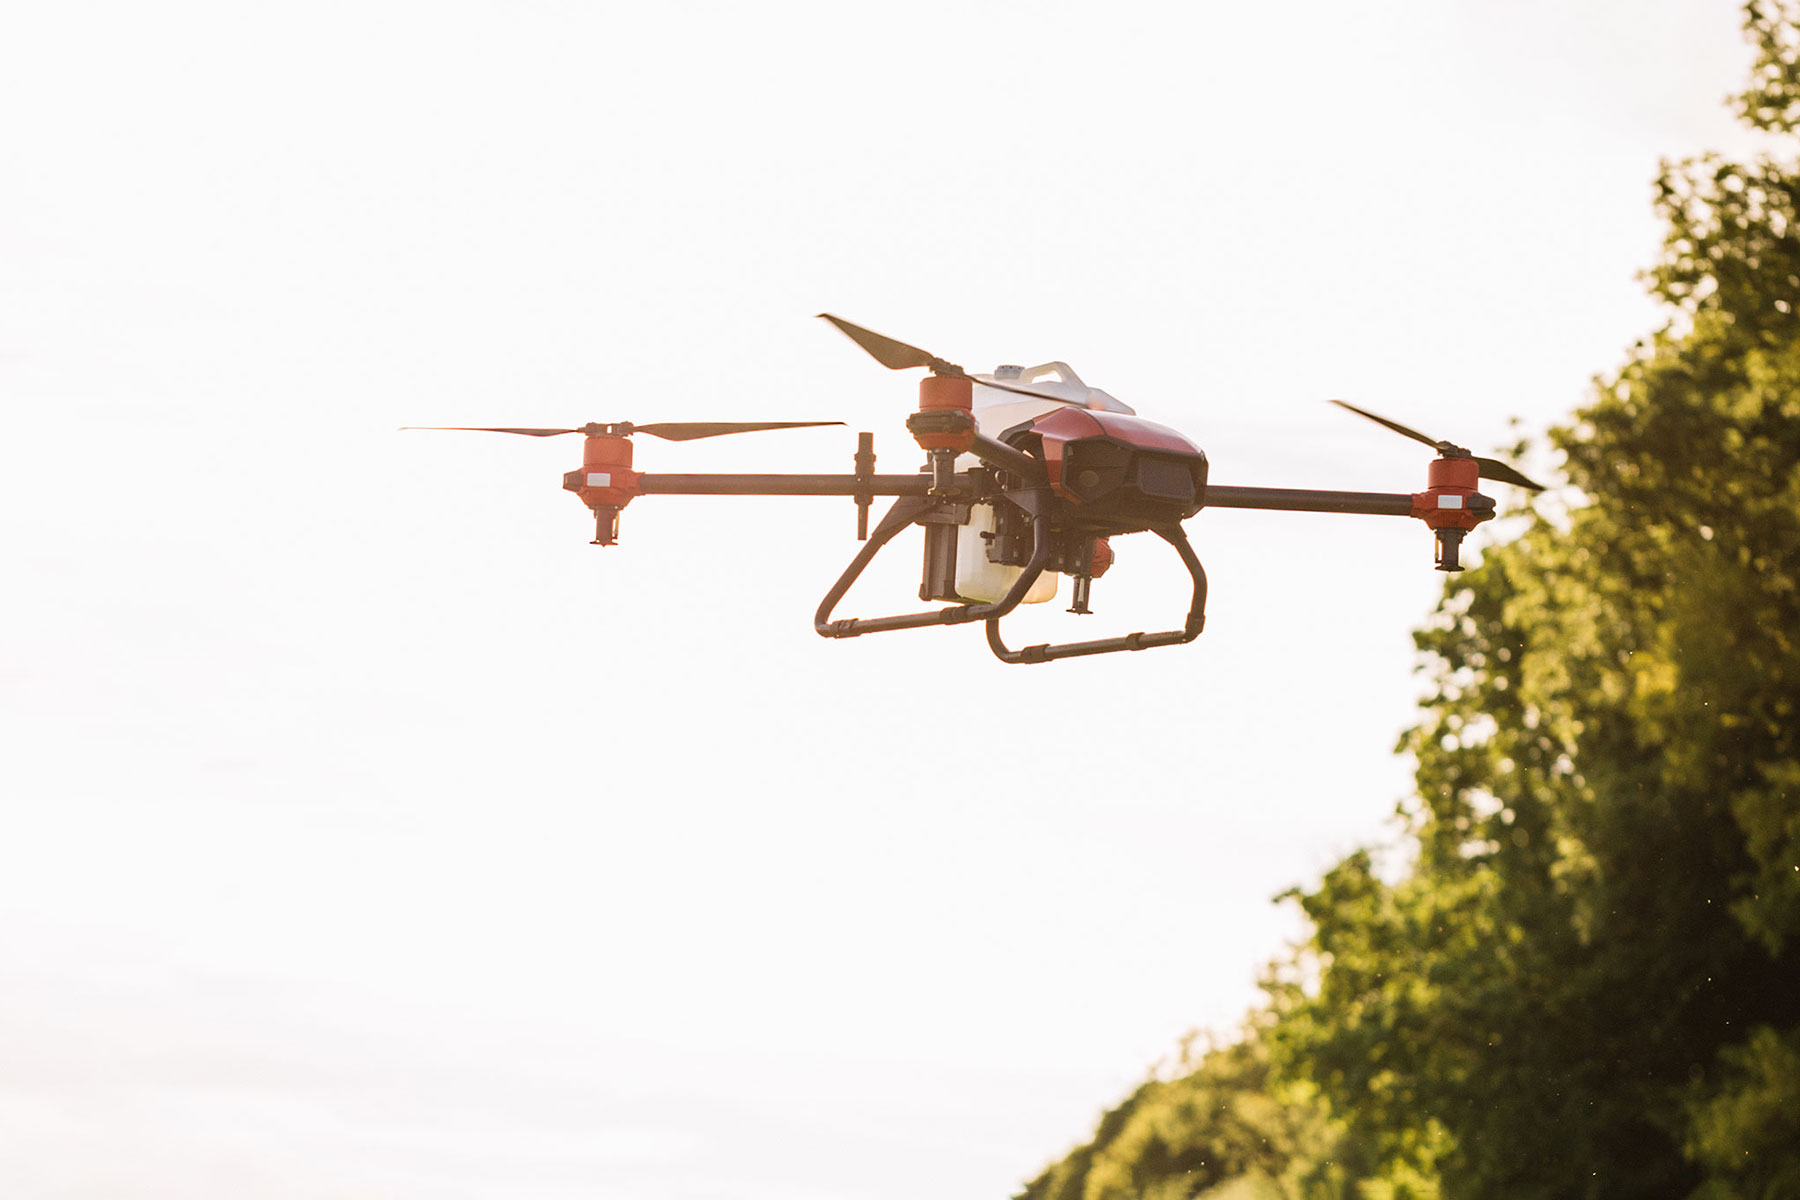 Navigating the skies: UAVs and air rights over private property